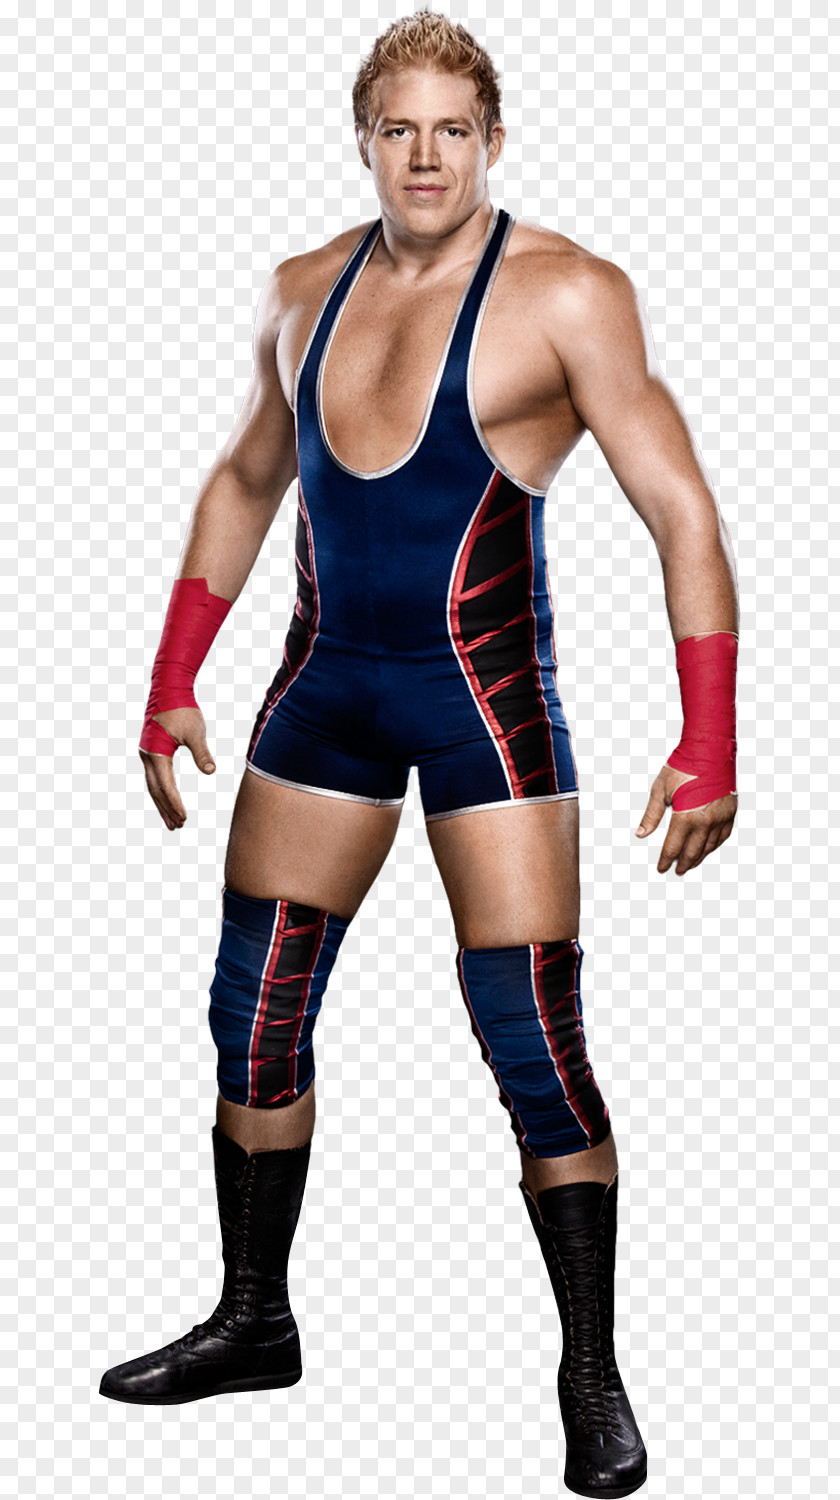 Jack Swagger Money In The Bank Ladder Match WWE 2K14 Professional Wrestler PNG in the ladder match Wrestler, wwe clipart PNG